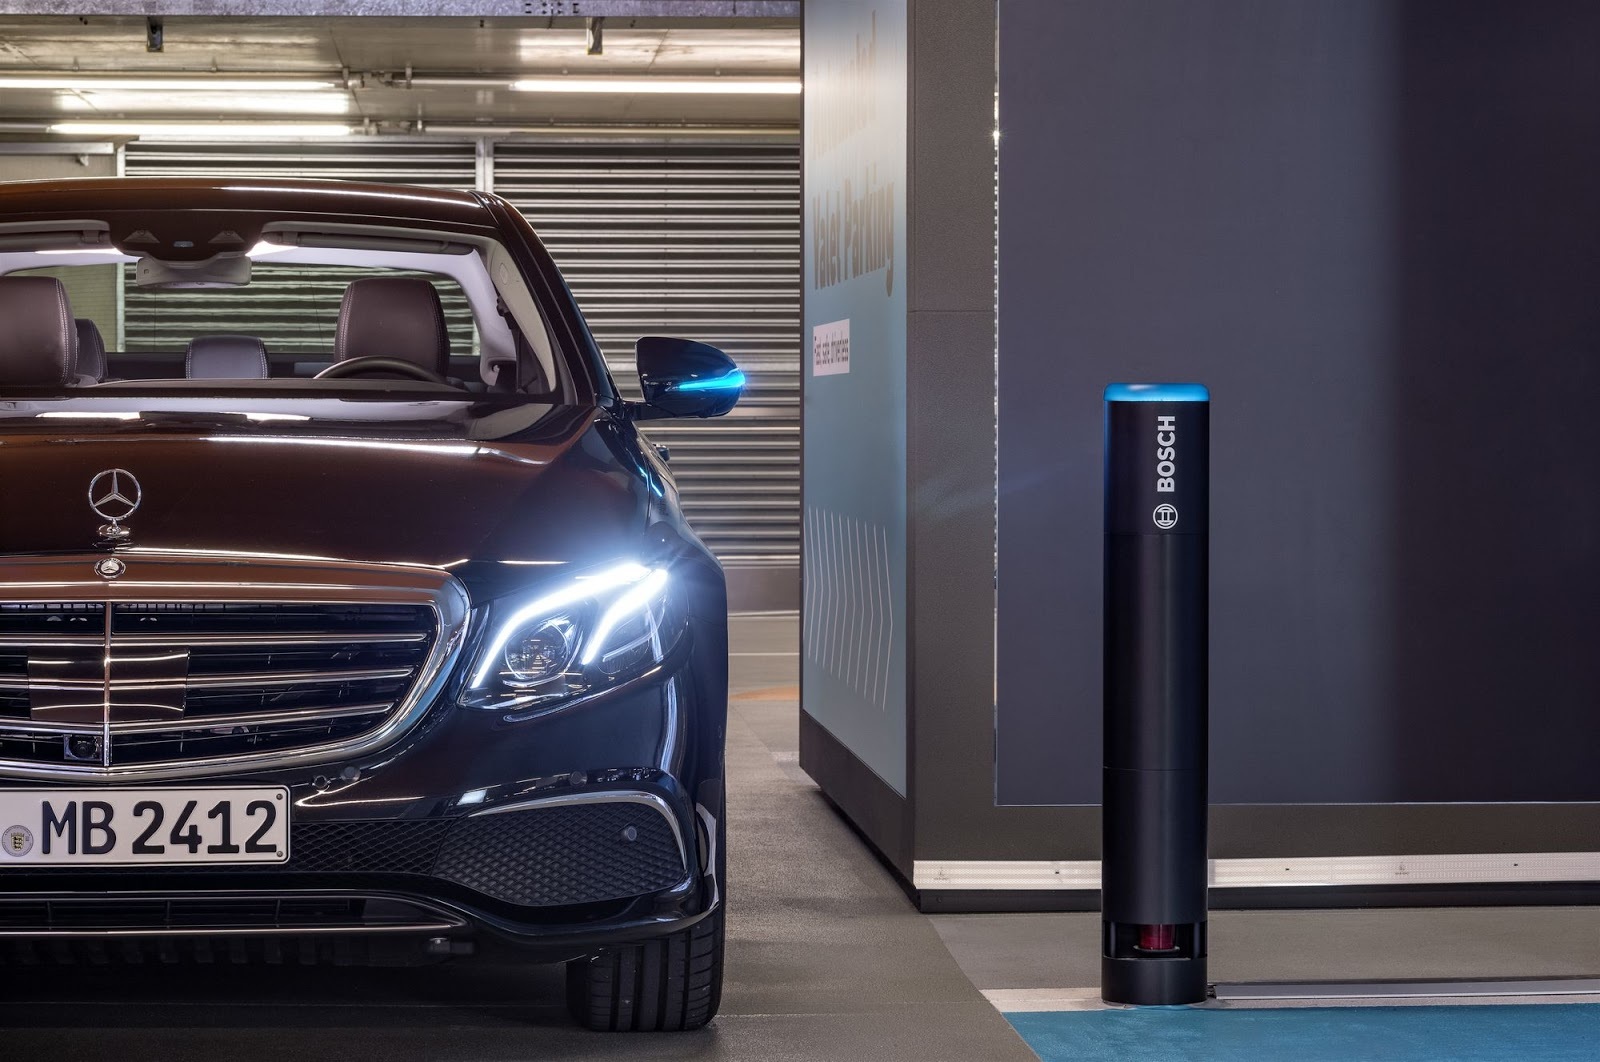 Mercedes Automated Valet Parking